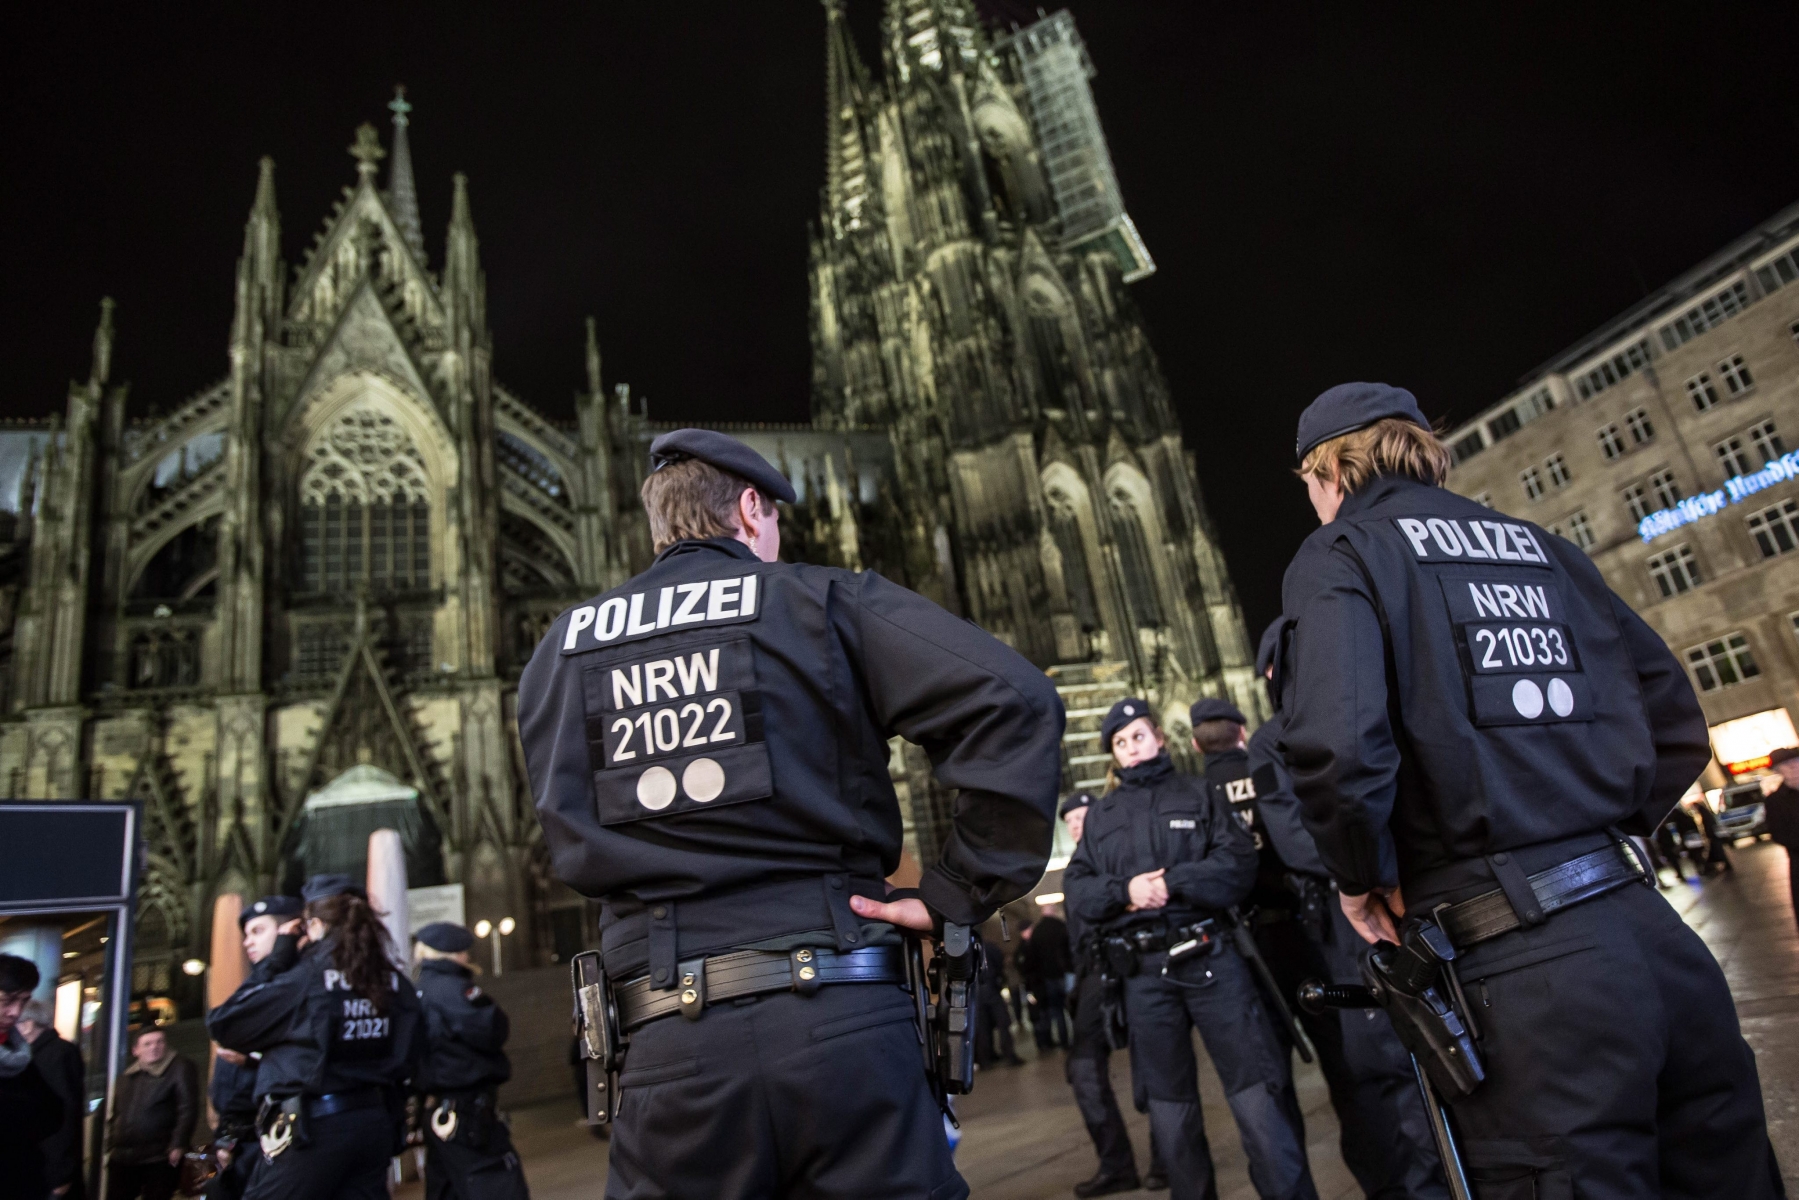 epa05096067 Police forces guard the area around the Cathedral in Cologne, Germany 10 January 2016. Police presence was beefed up in consequence to the New Year's Eve's attacks. The number of cases reported to Cologne police following a night of mass sex assaults and thefts continued to rise sharply, with the latest official figures rising to 516 complaints from a previous 379, around 40 per cent of the complaints involve allegations of sexual assault, according to the police statement.  EPA/MAJA HITIJ GERMANY POLICE COLOGNE SITUATION